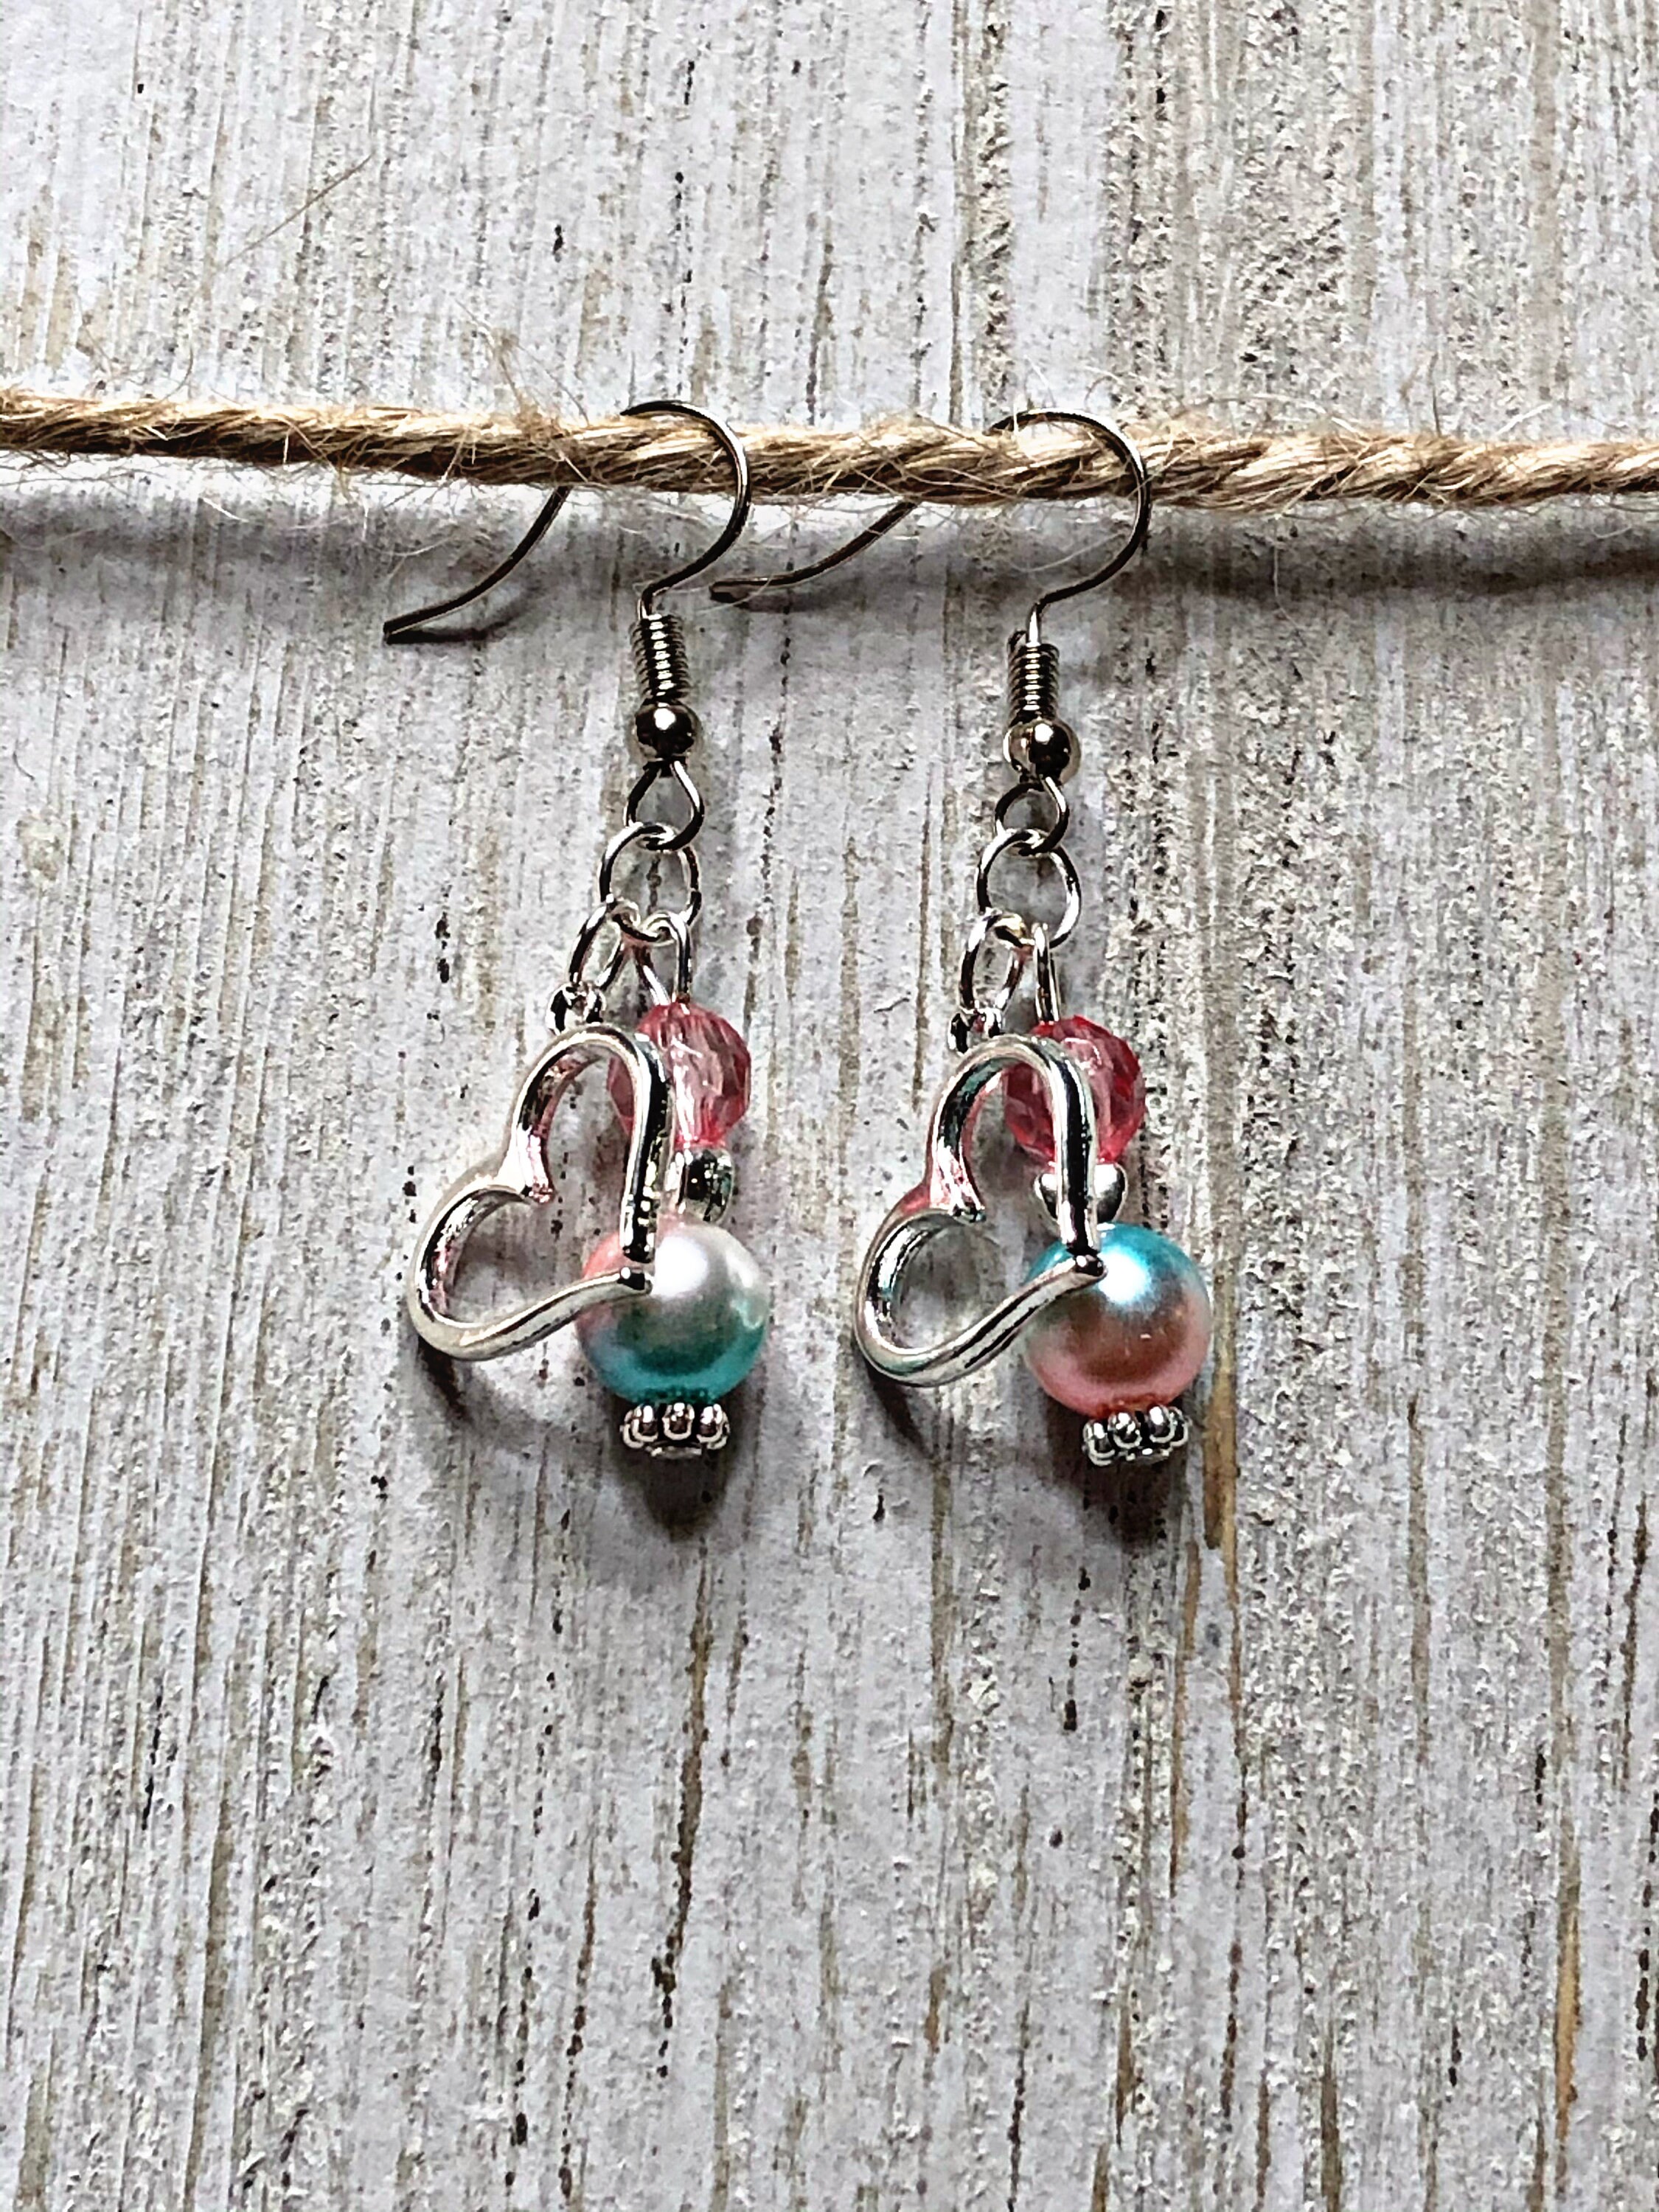 Silver Open Heart Dangle Earrings with Peach and Blue Accents | Etsy